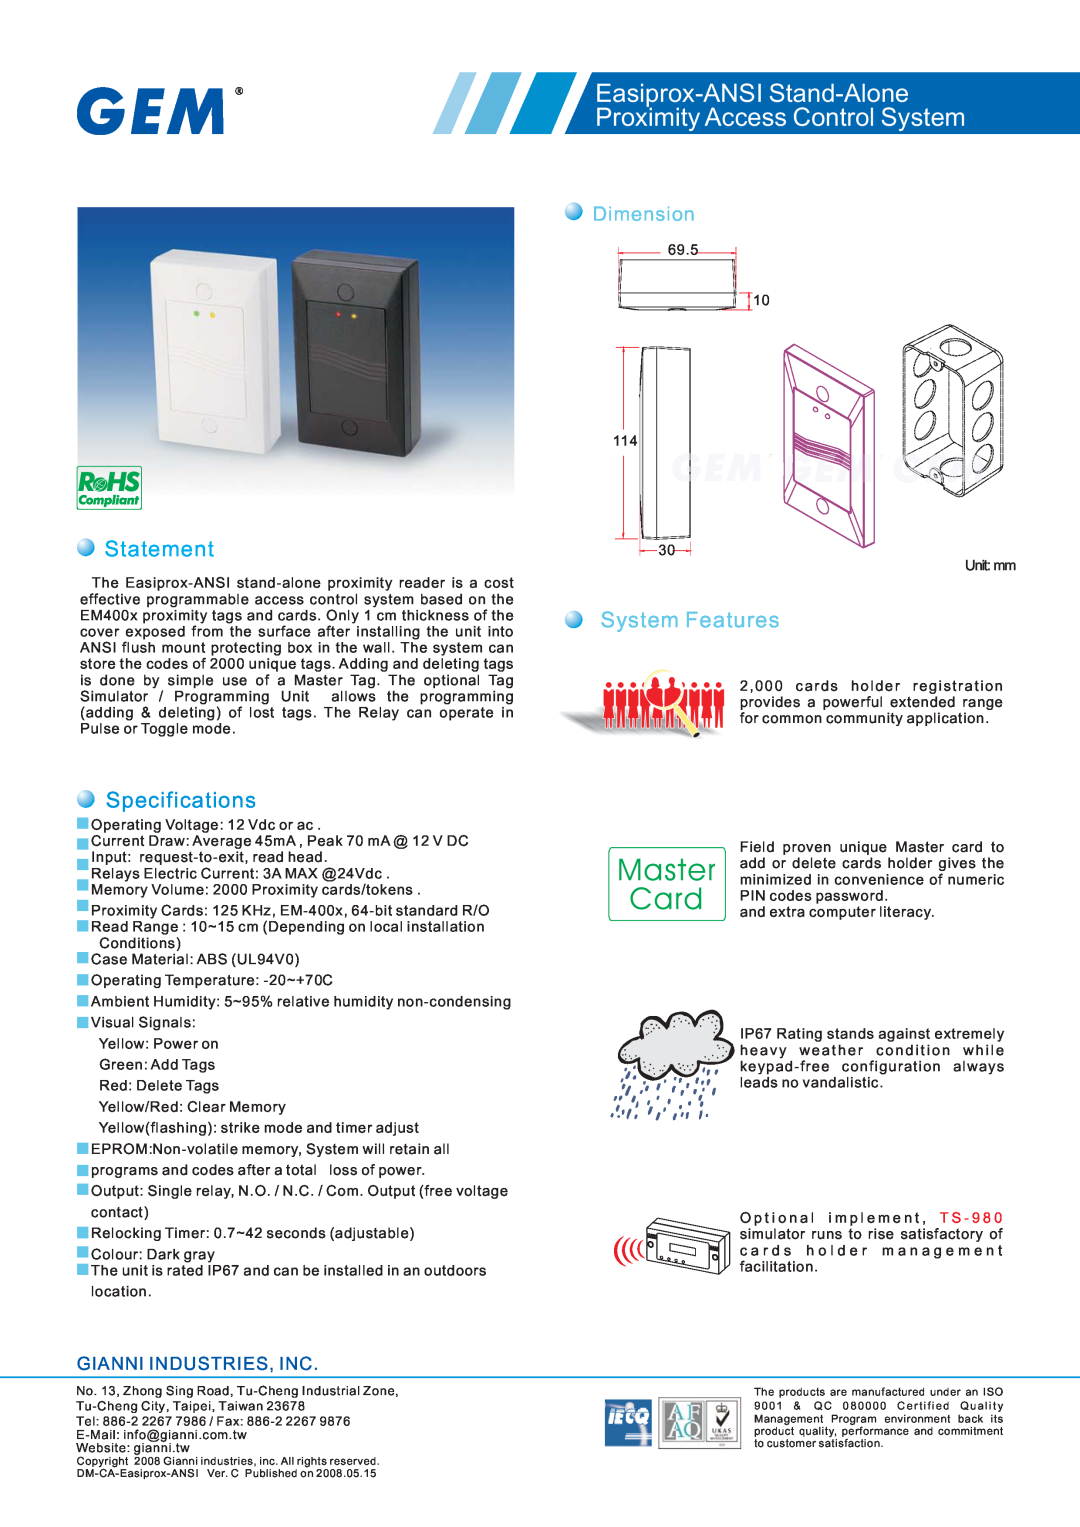 Gianni Industries specifications Easiprox-ANSI Stand-Alone Proximity Access Control System, Statement, Specifications 